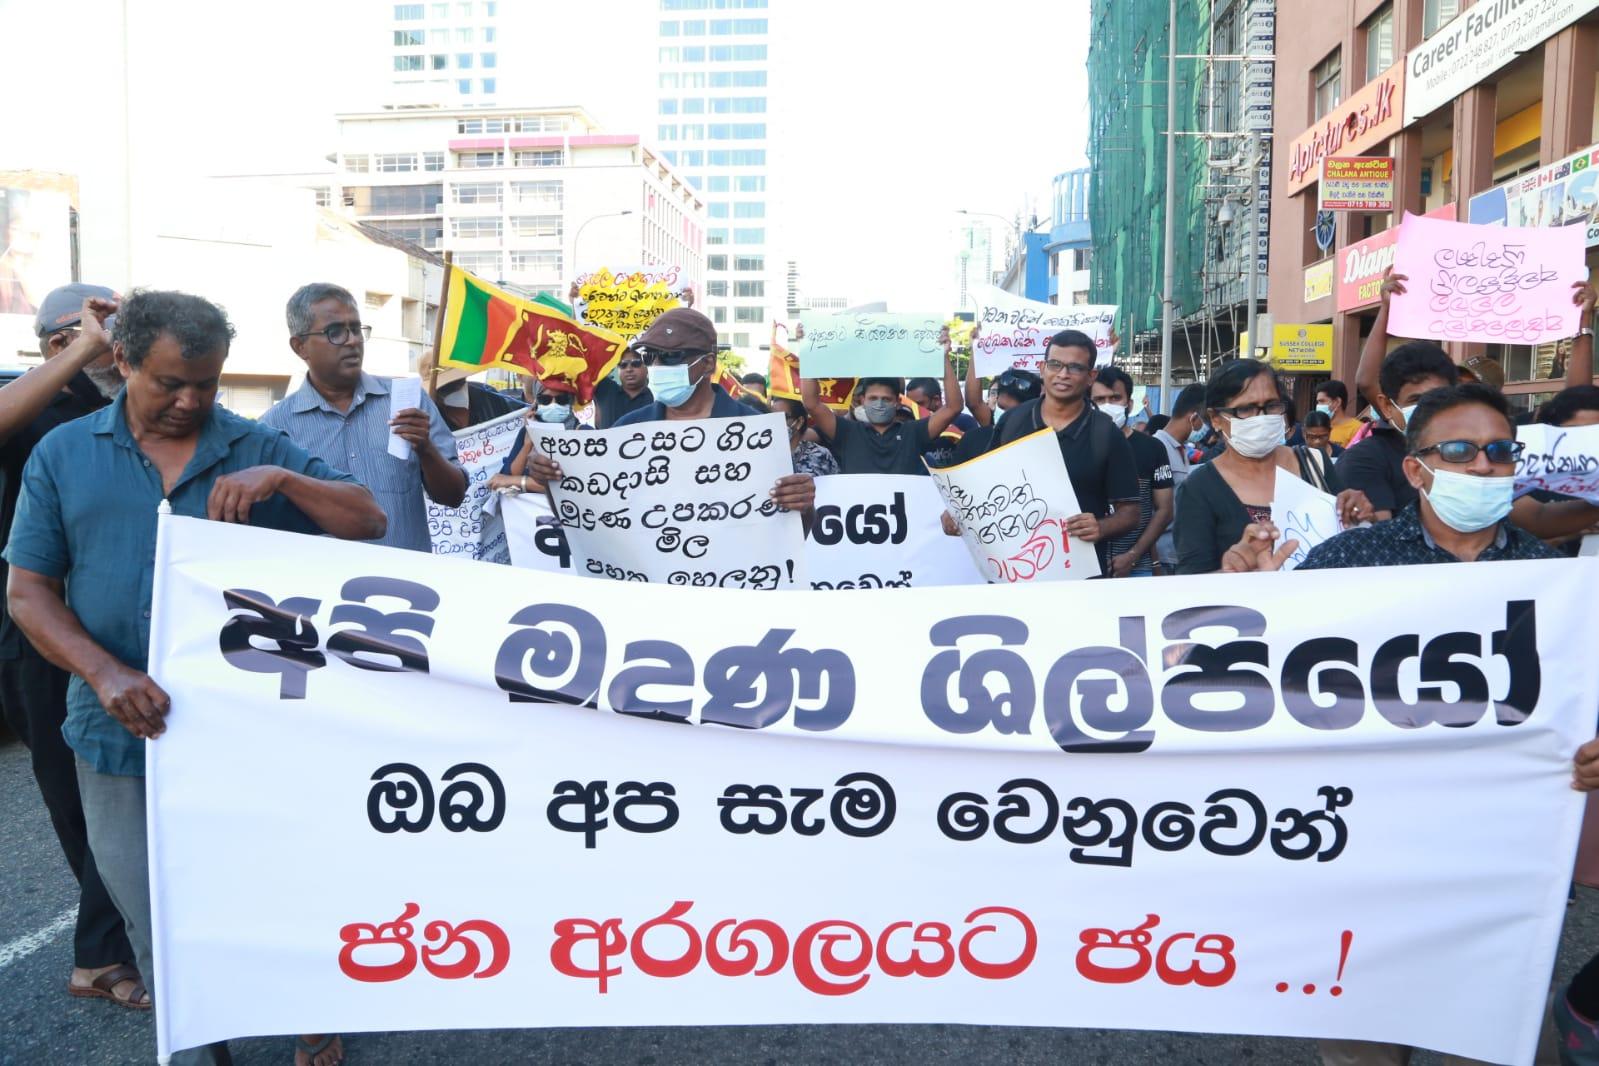 Publishers protest against the current government - Read Photos